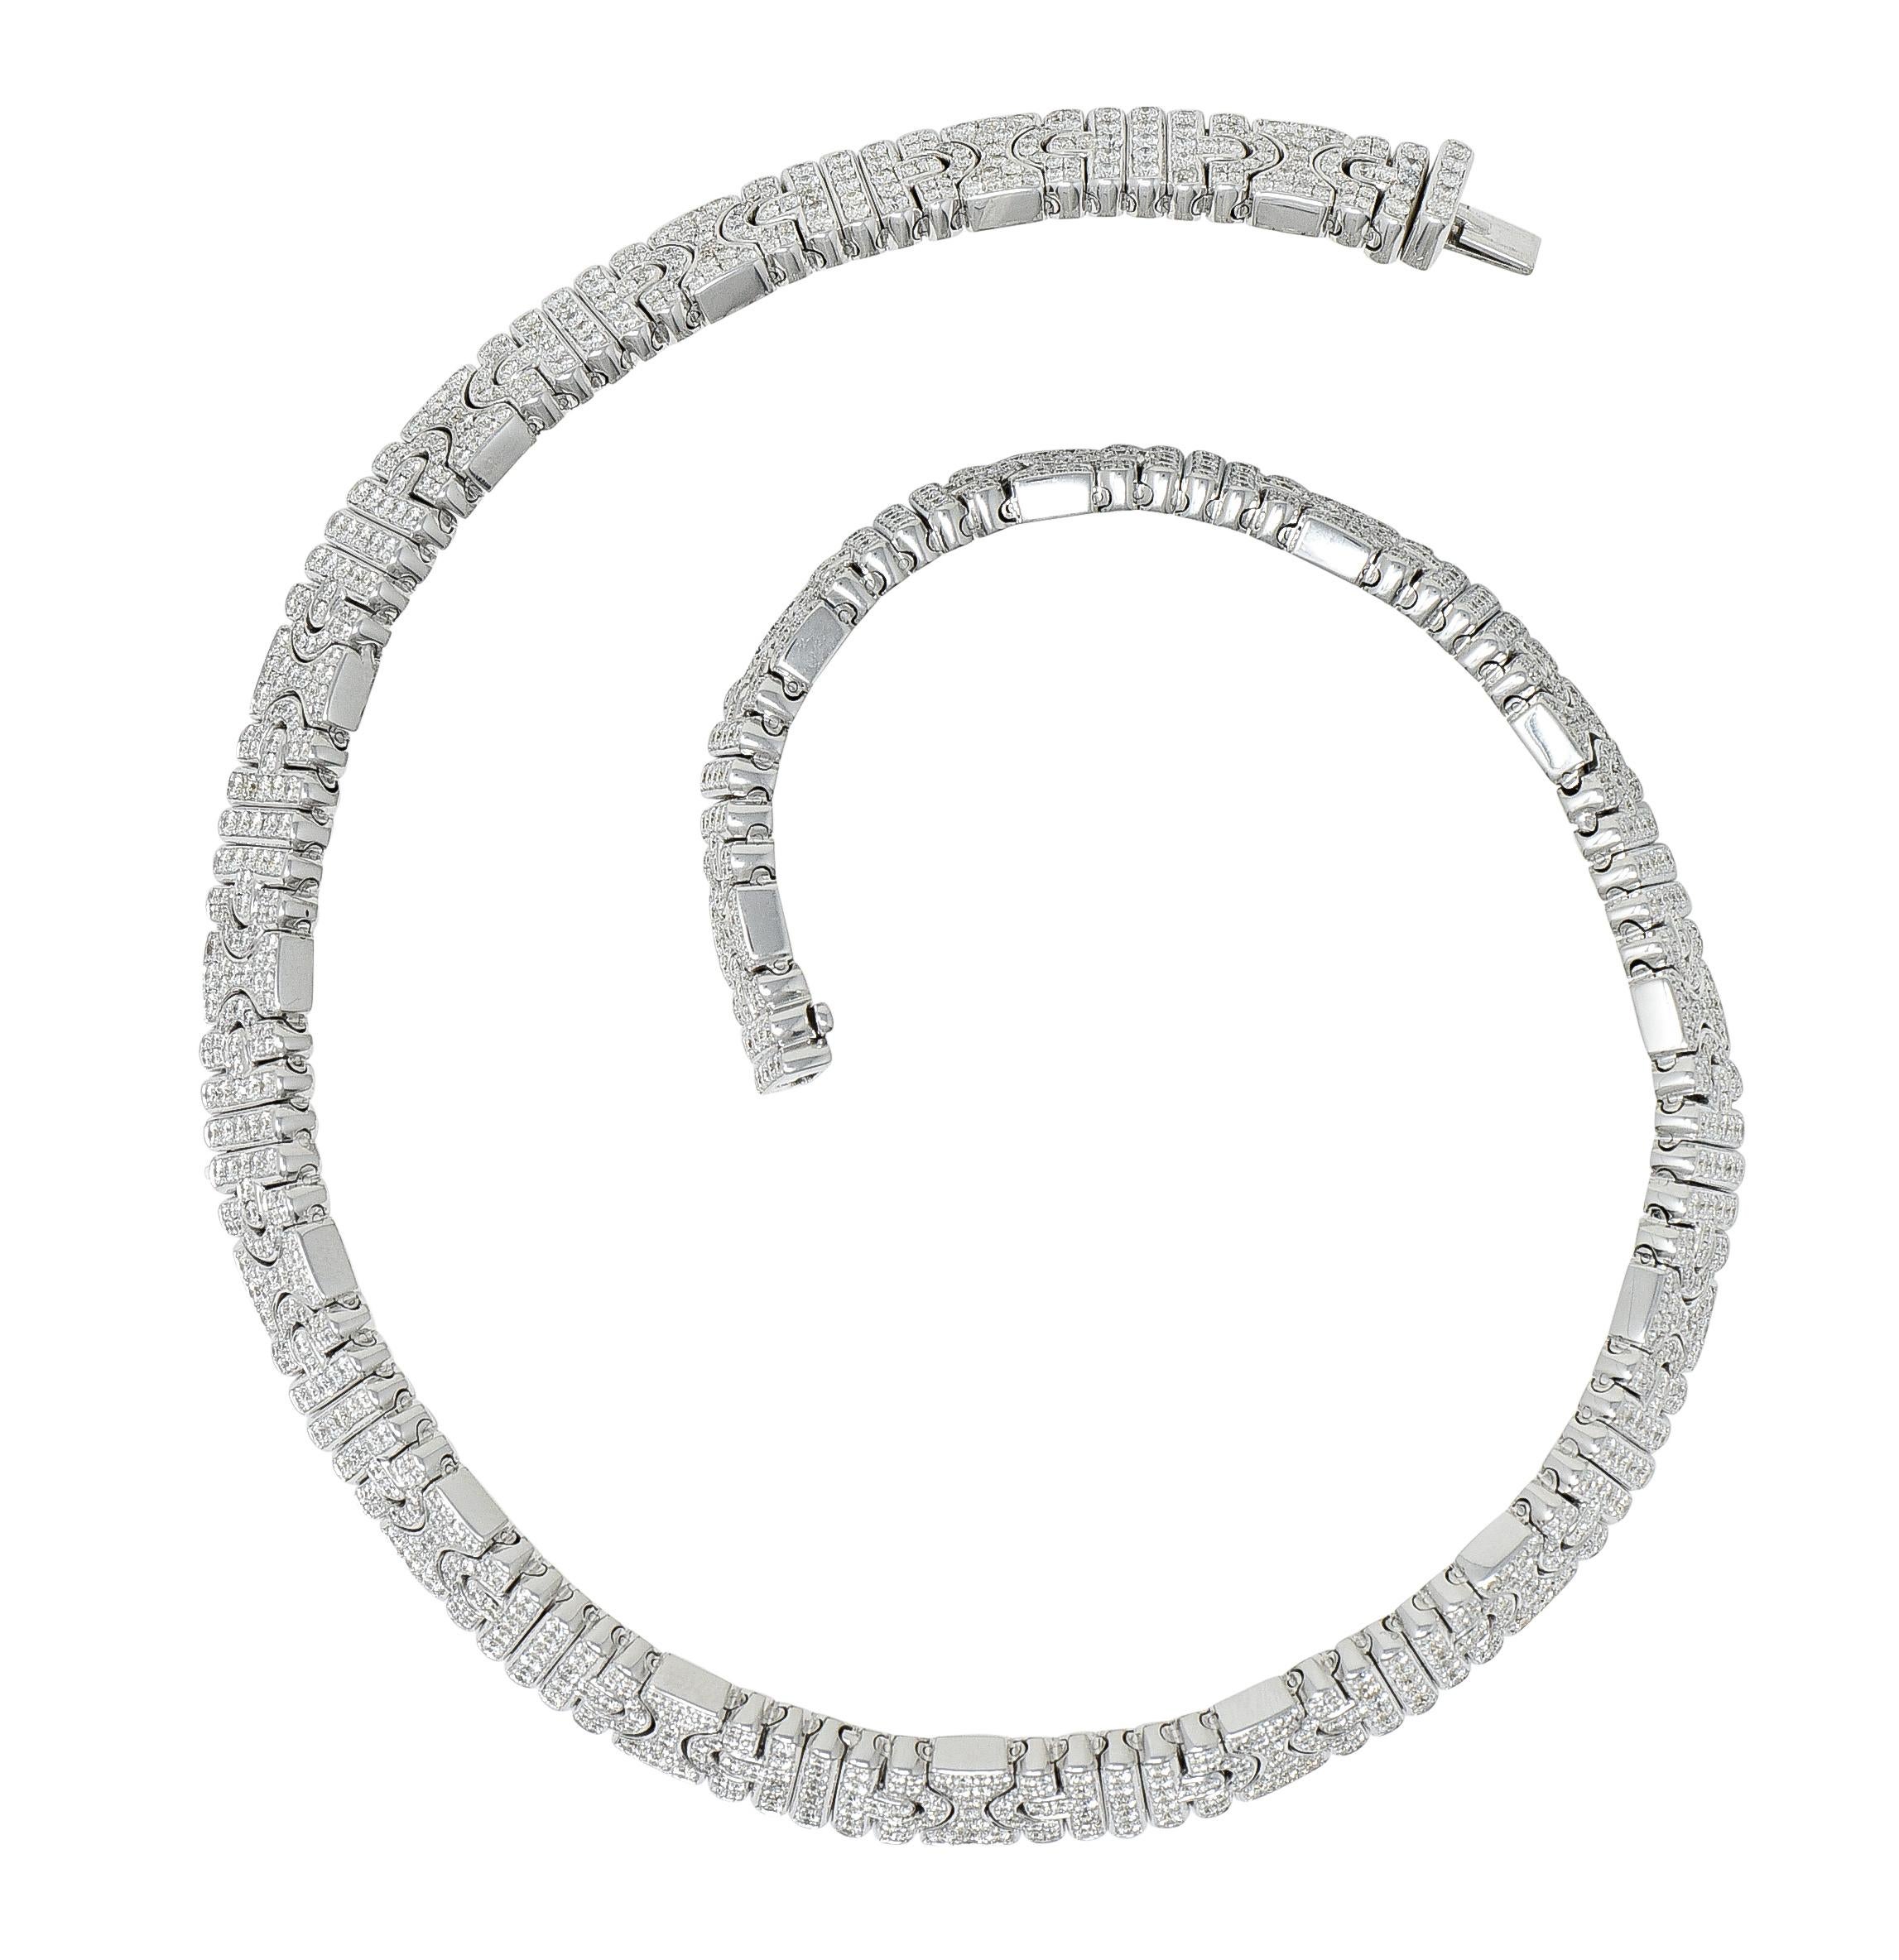 Collar necklace is comprised of the iconic Parentesi motif

Consisting of a seamless pattern of hourglass, arch, and bar links

Pavè set throughout by round brilliant cut diamonds

Weighing in total approximately 18.00 carats - F to H color with